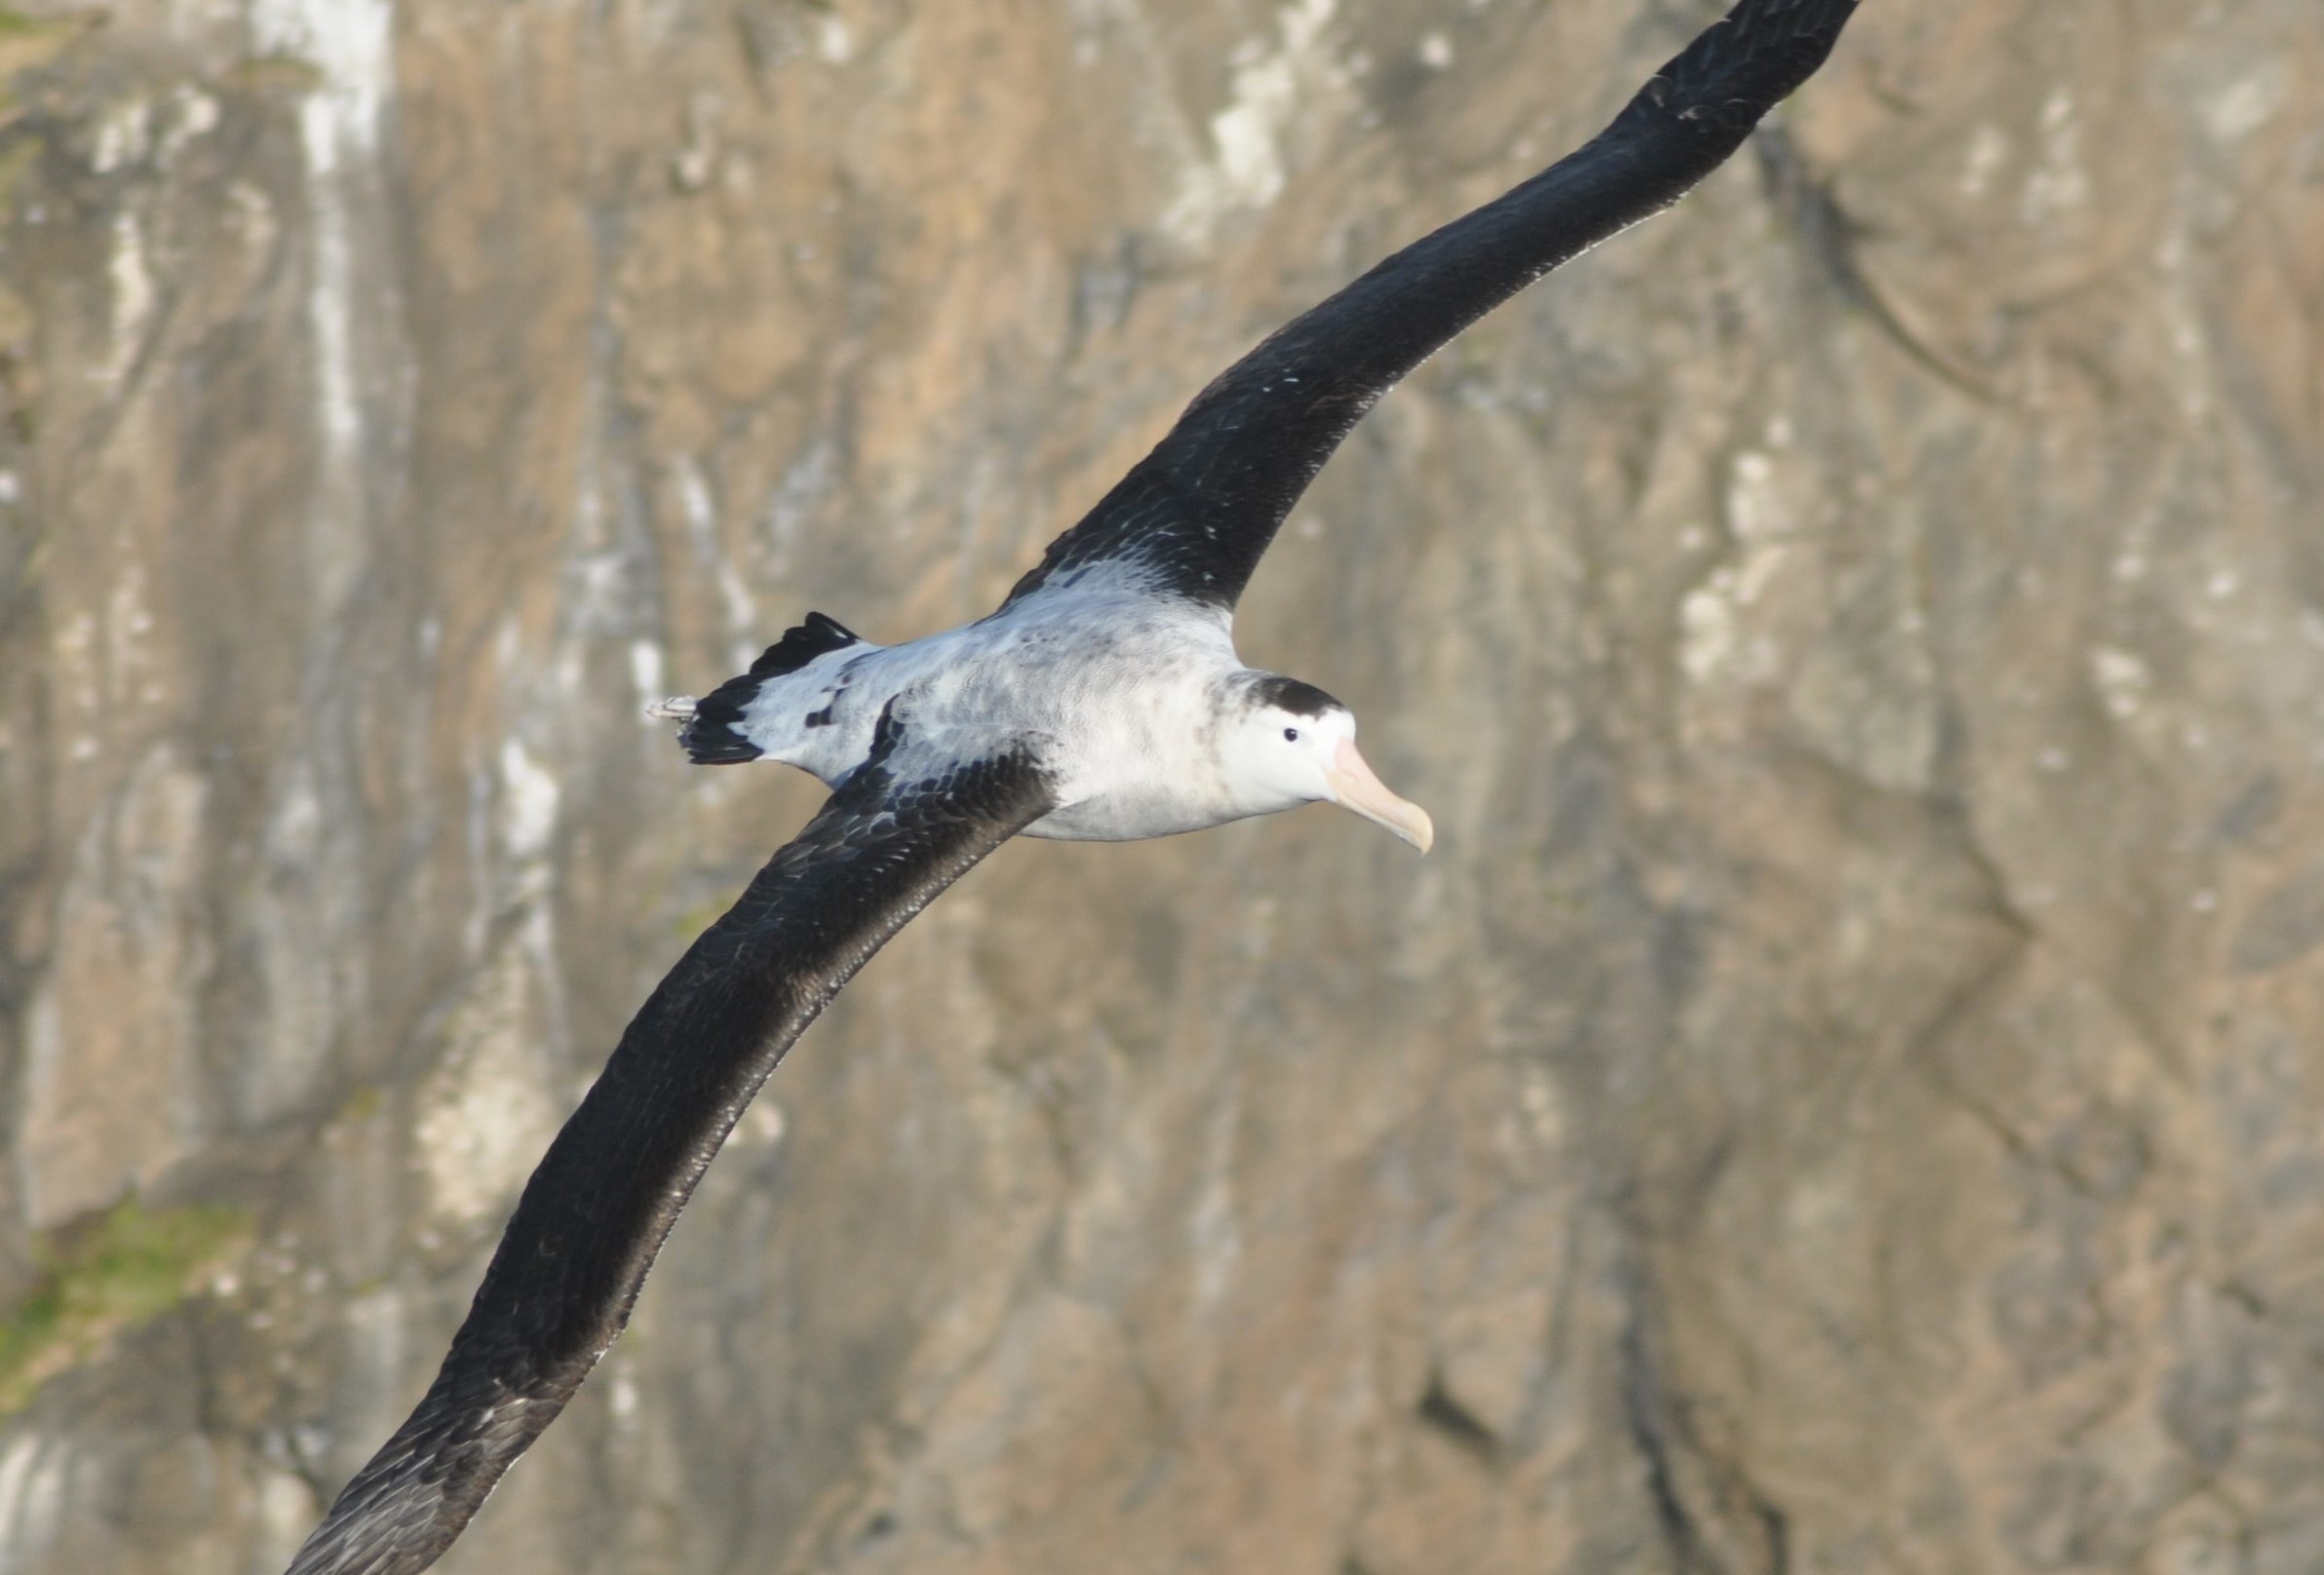 A male Antipodean wandering albatross soars through the sky.